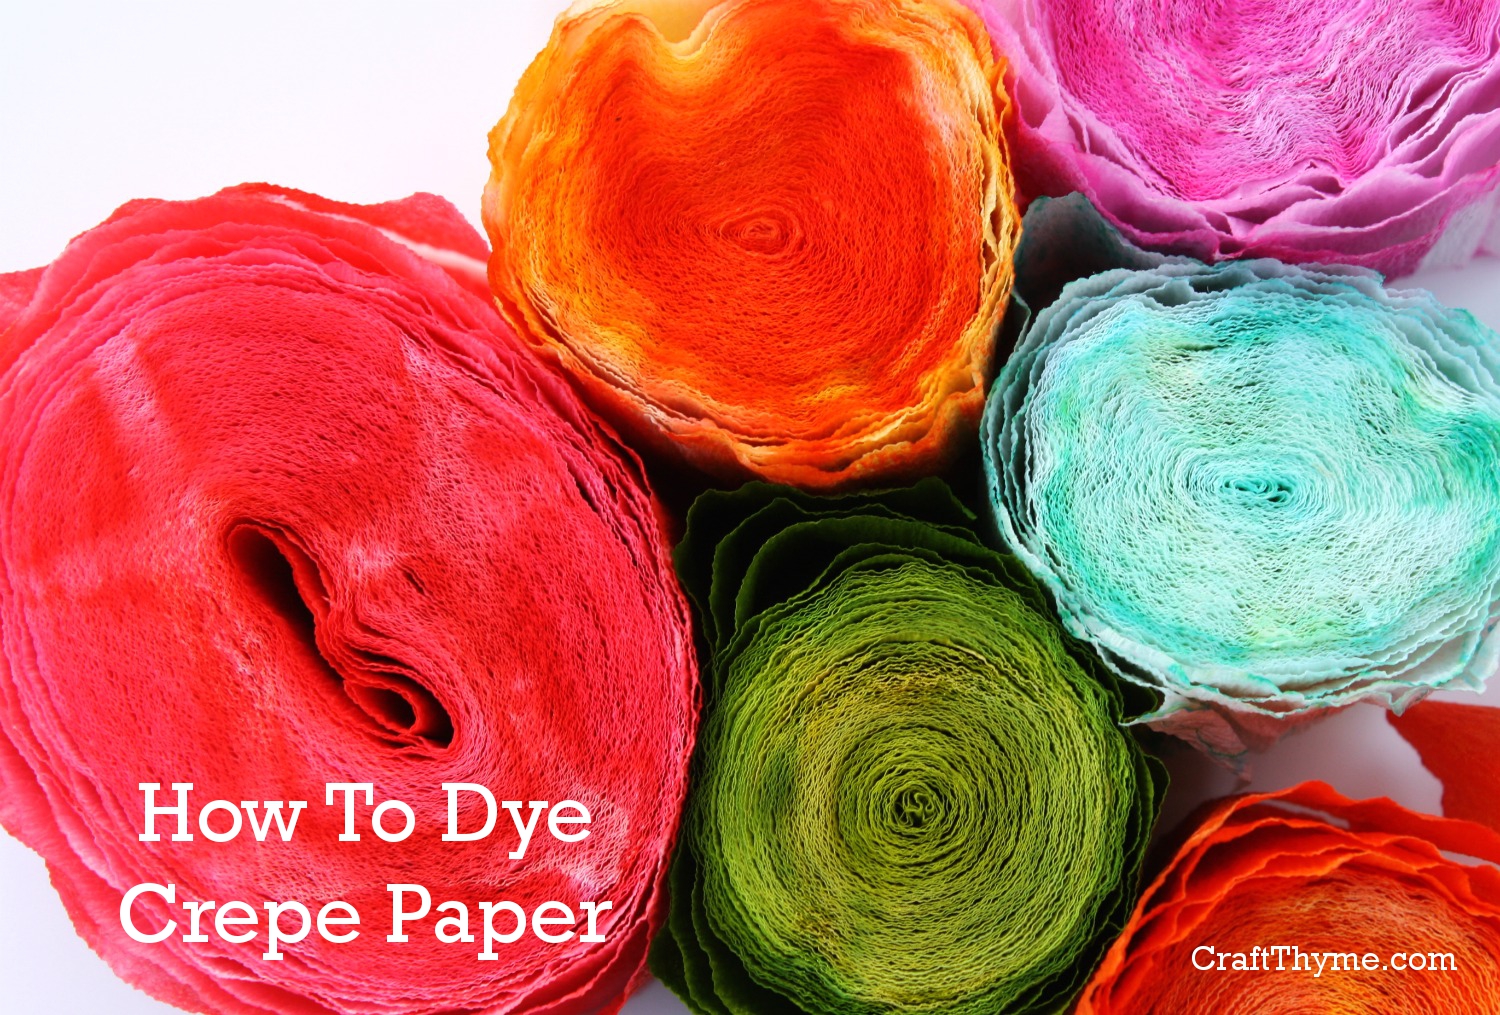 How to Dye Crepe Paper